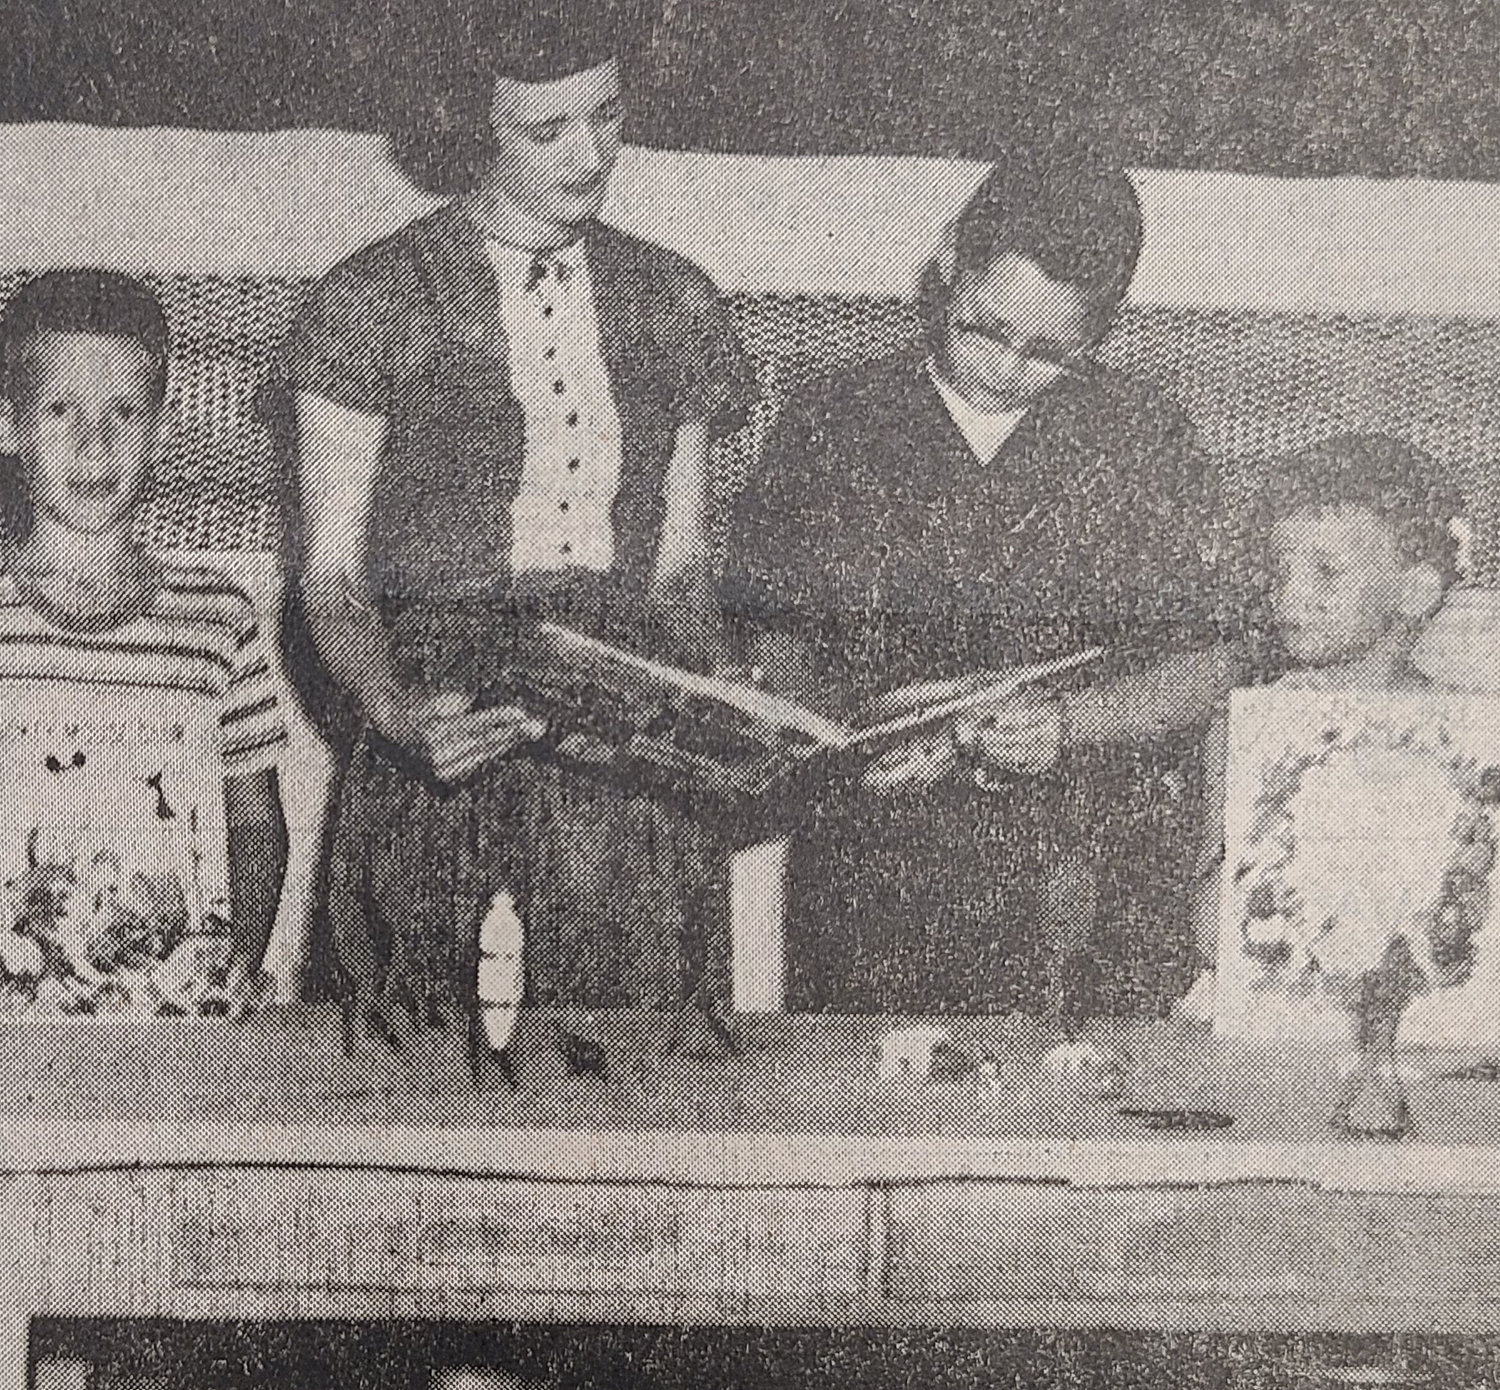 Robert Longwell (center) with Librarian Bonnadell Fredrickson. Other winners in the
summer reading club were Tom McDermott (left) who placed second; Susan Jo Berry,
Randolph, who placed fourth, and Rose Ann Templemeyer (not pictured) who placed third. Aug. 3, 1961